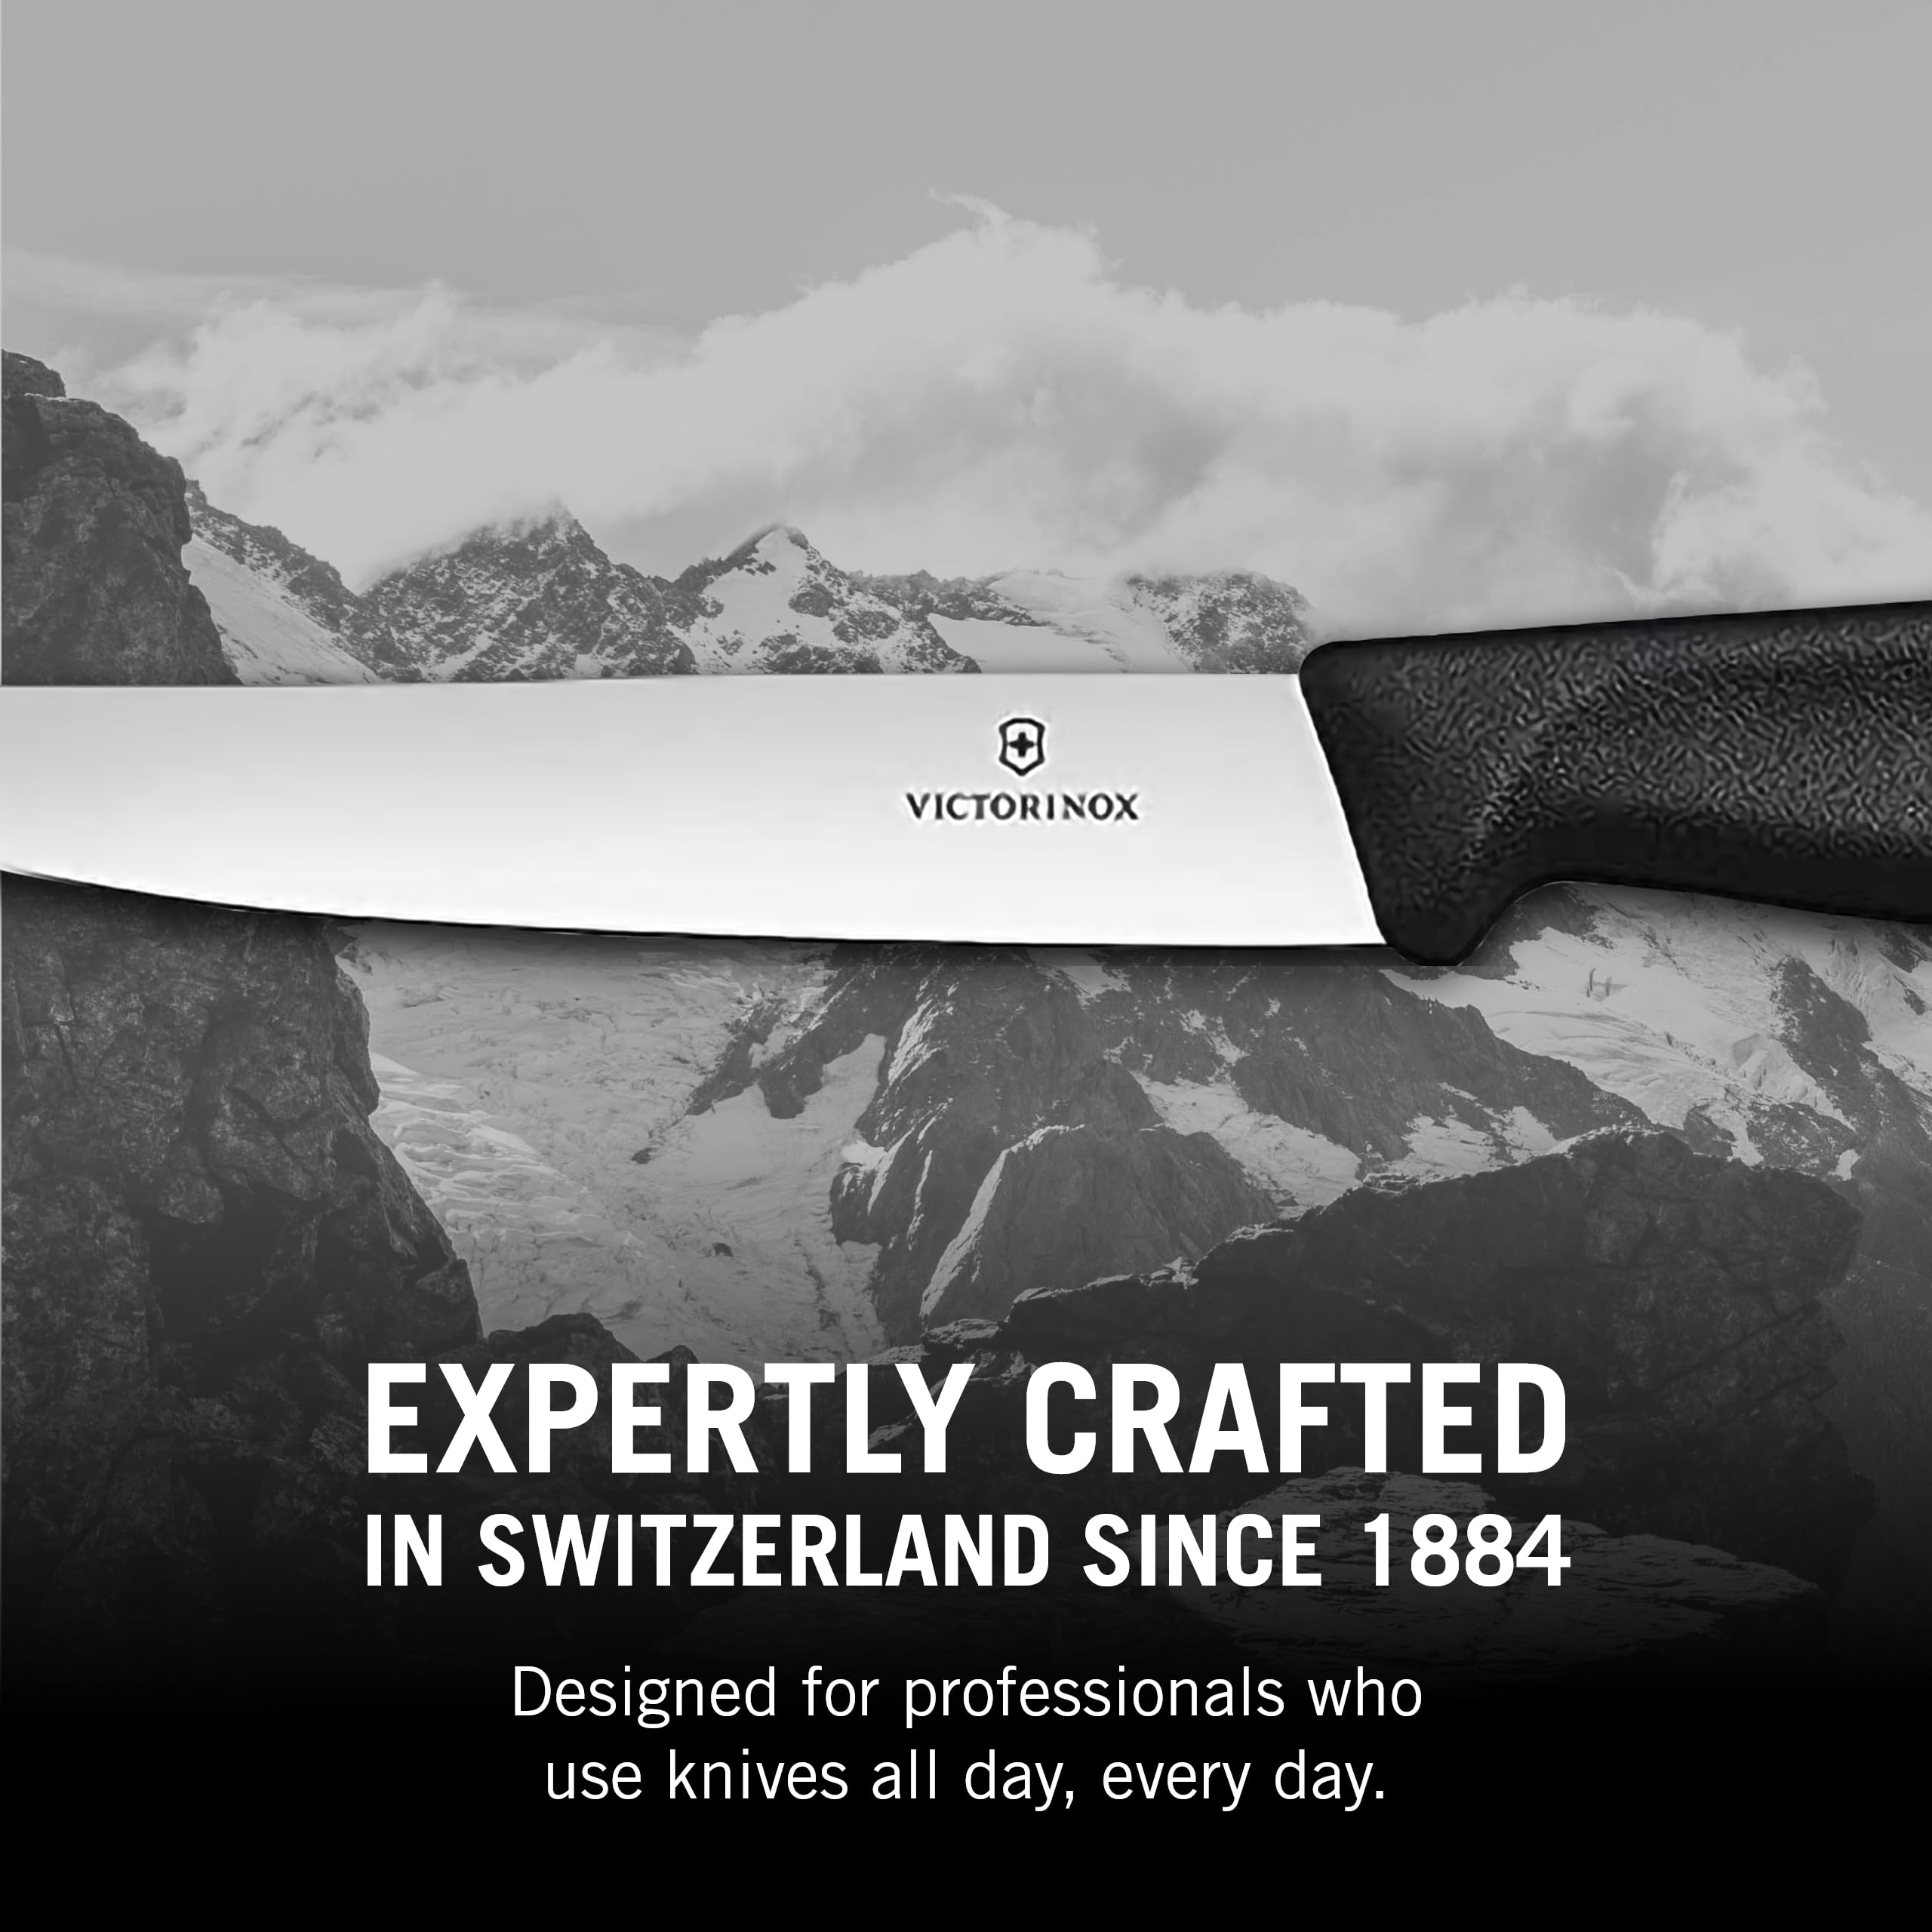 Victorinox Swiss Classic Steak Knives - Cooking Knives for Kitchen Utensils - Ergonomic, Stainless Steel Meat Knives - Black Handles, Straight Edge, 6-Piece Set